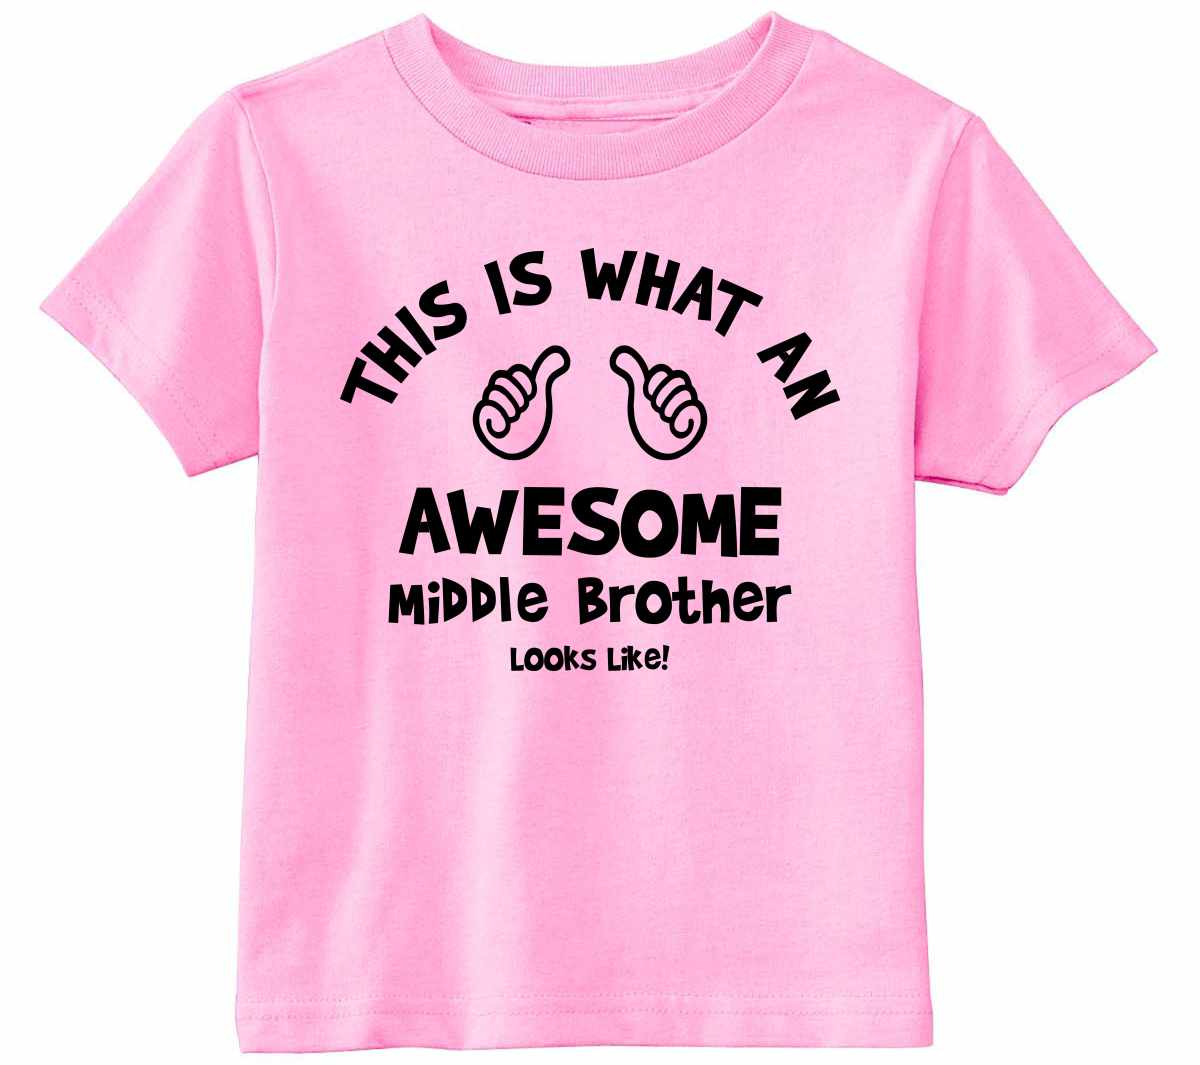 This Is What An Awesome Middle Brother Looks Like on Infant-Toddler T-Shirt (#1094-7)